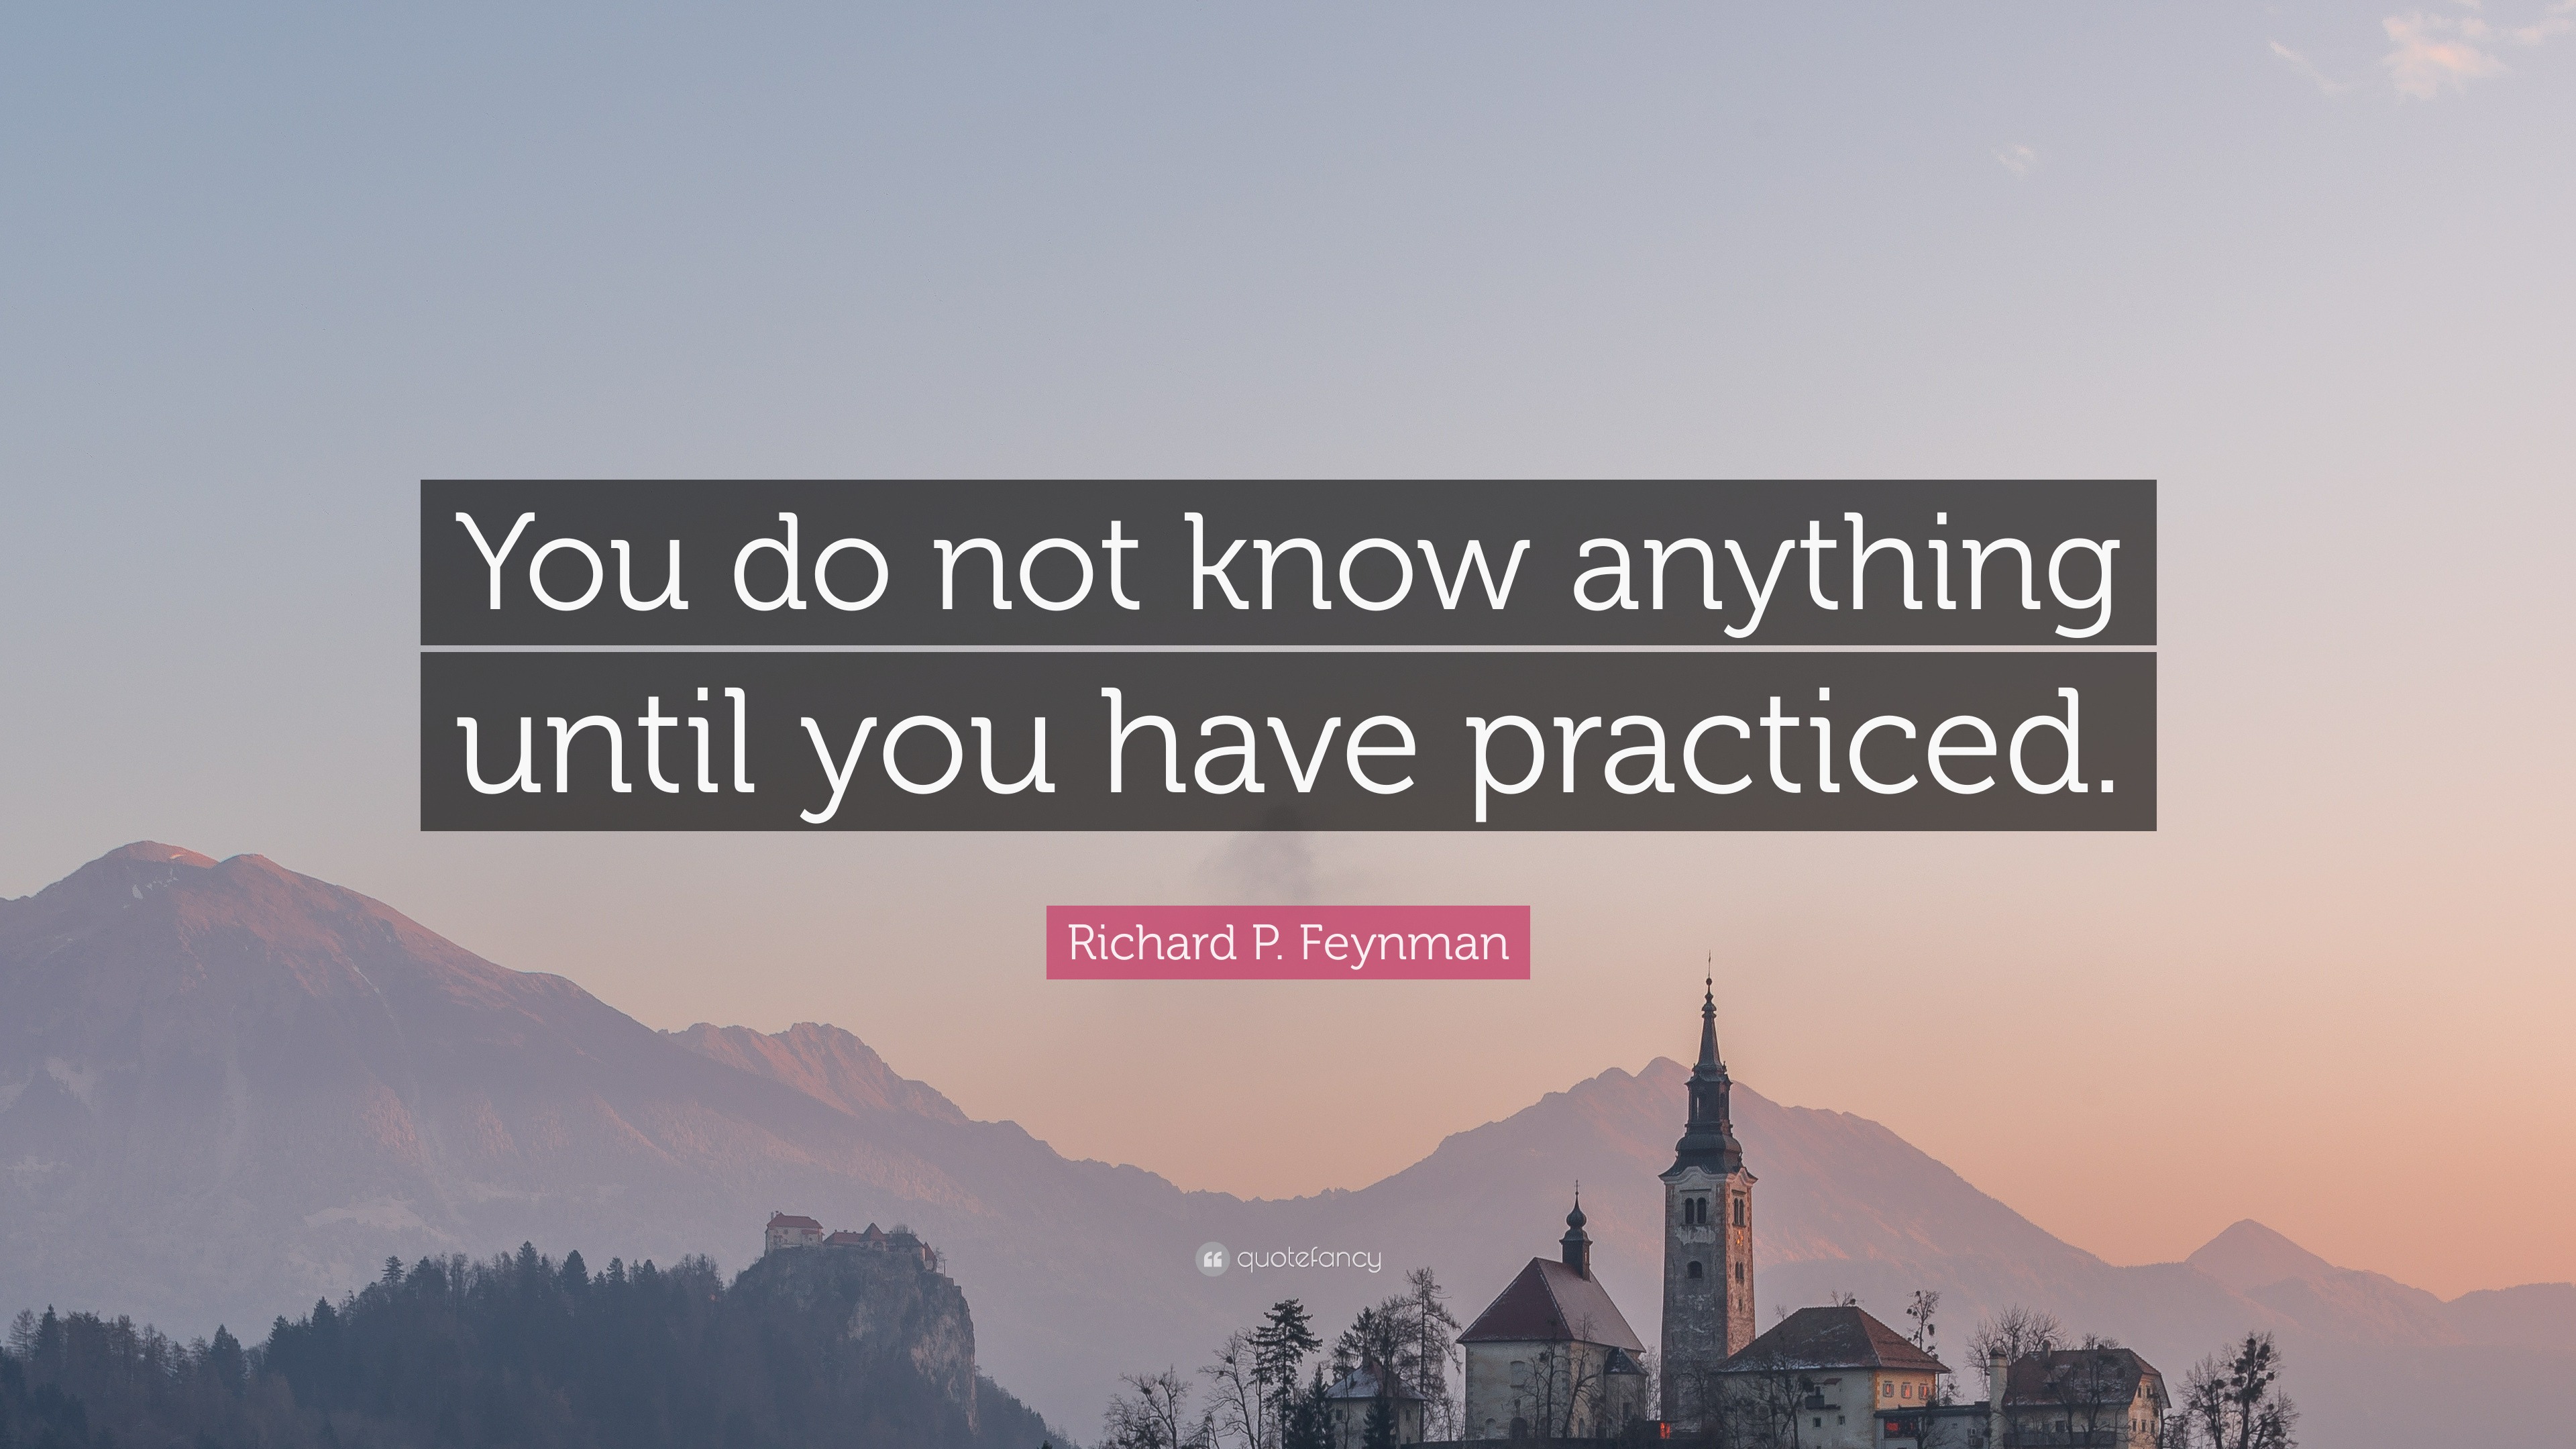 Richard P. Feynman Quote: “You do not know anything until you have ...